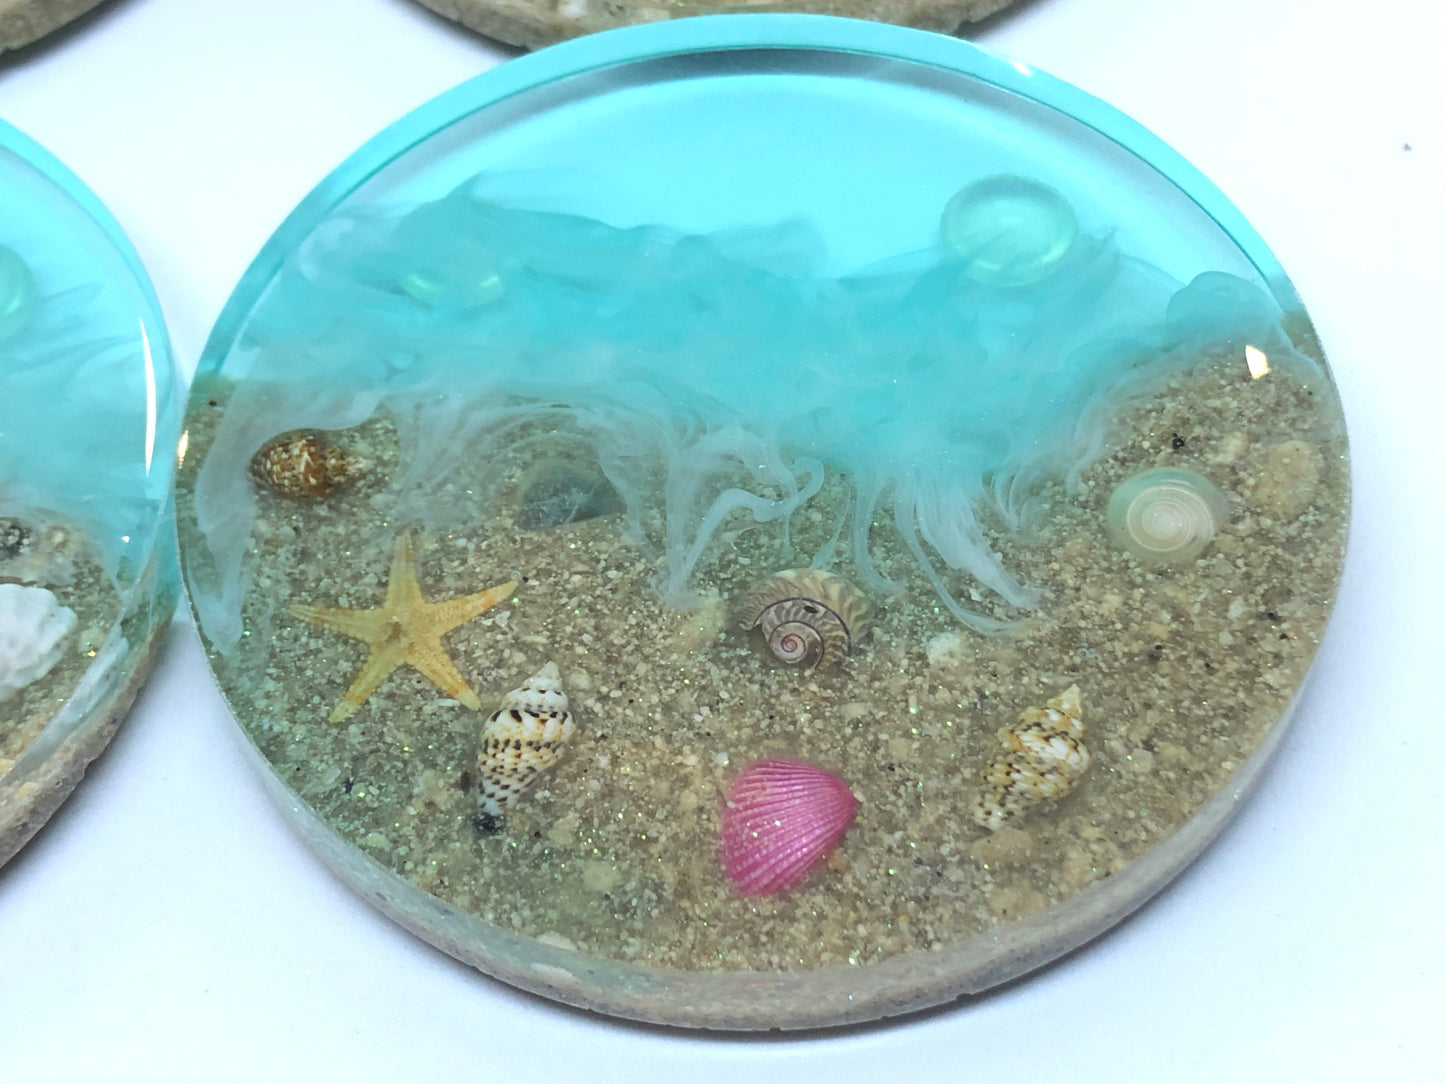 Small Round Beach Coasters with Sand and Shells